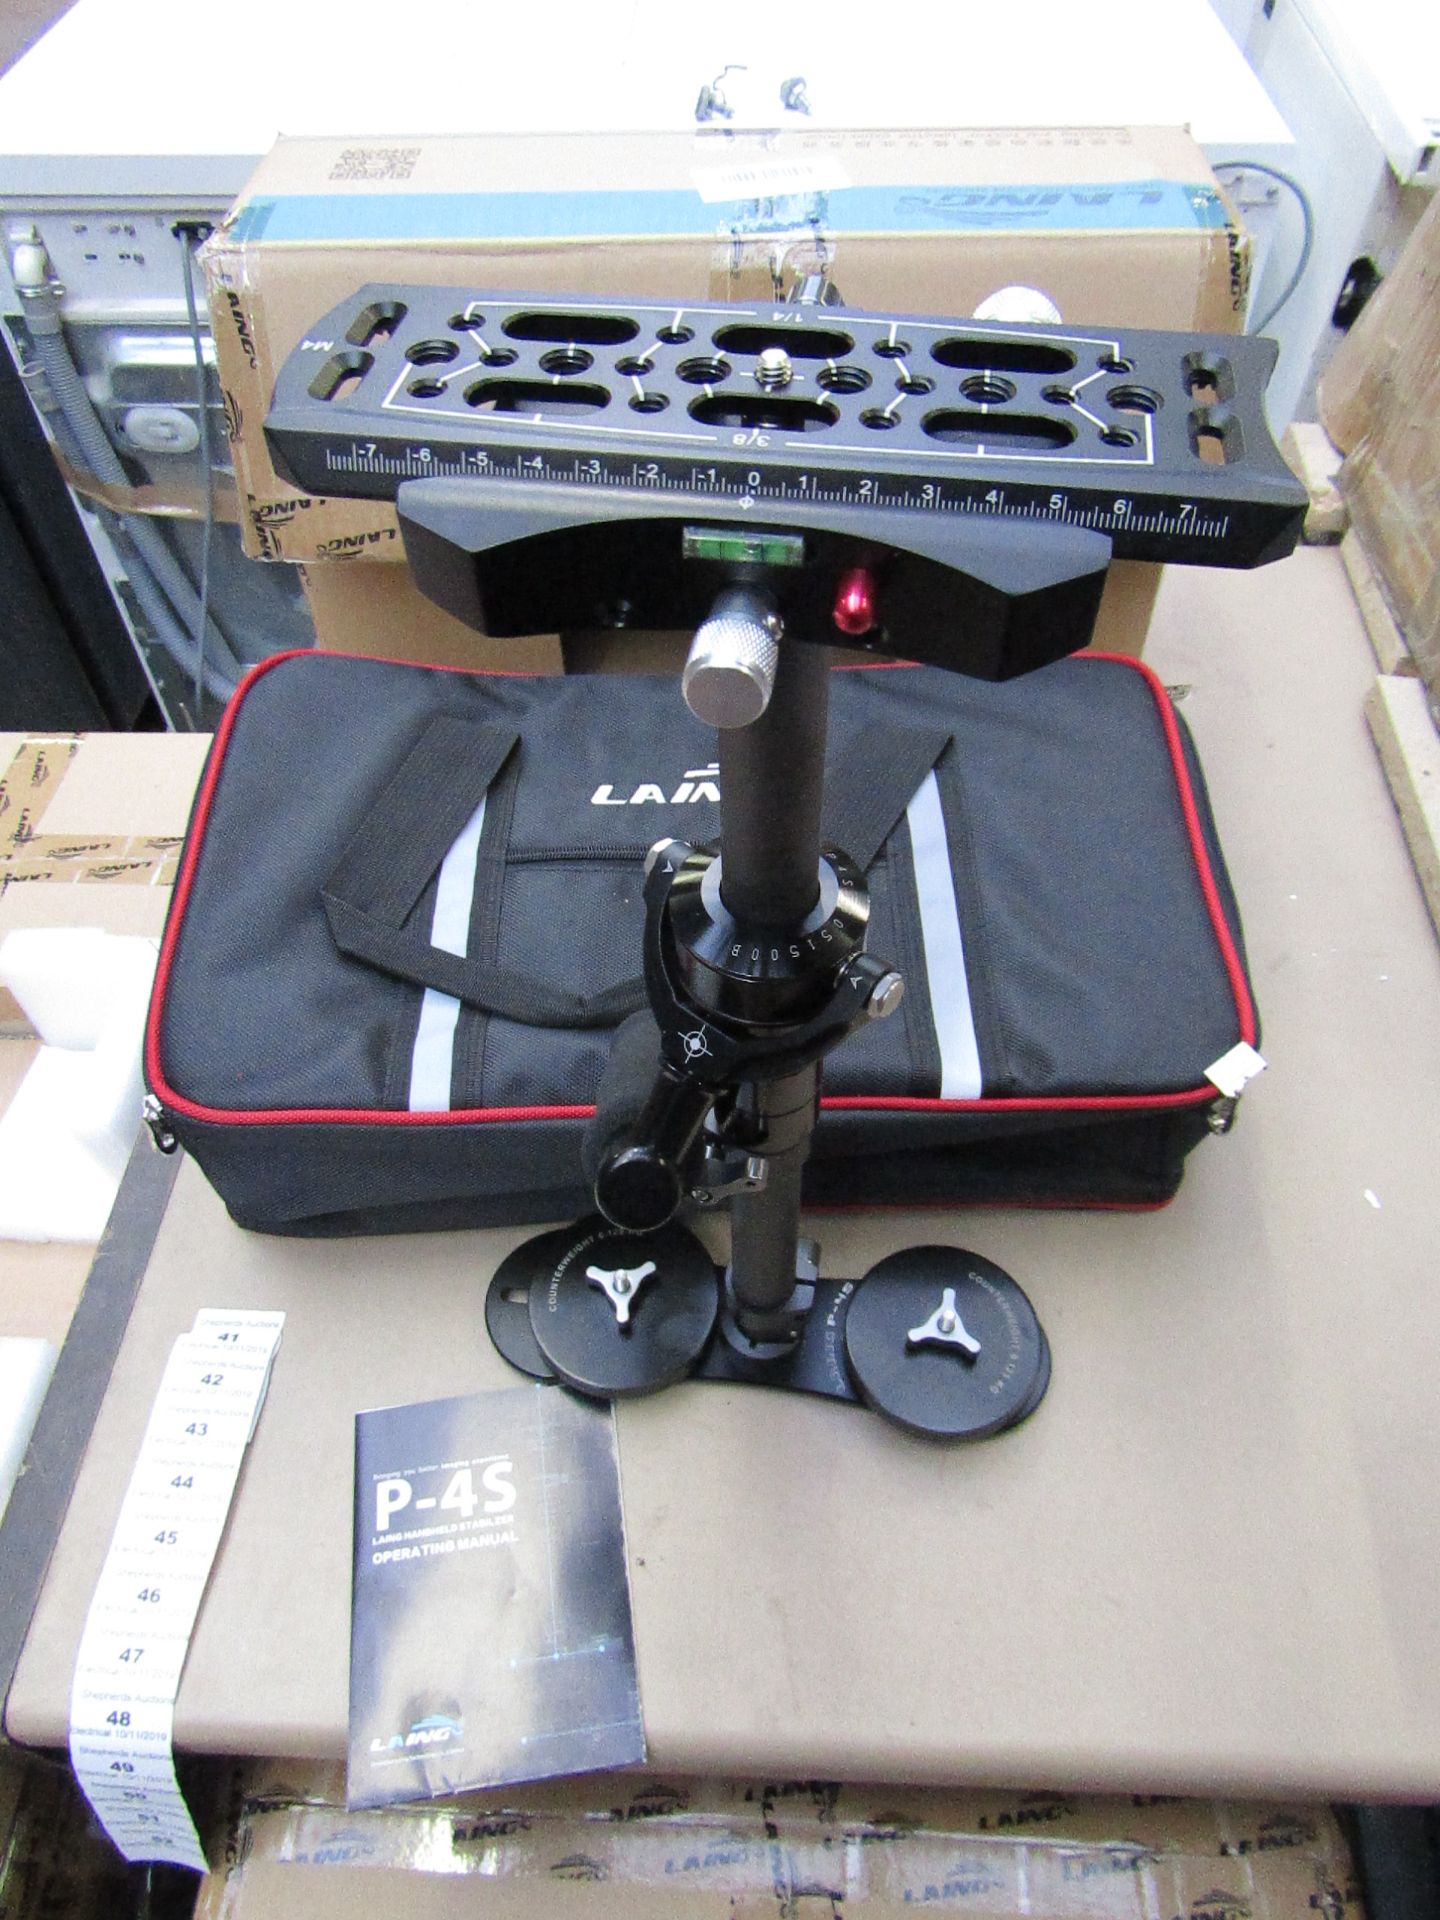 Laing P-04S(P-4S) Carbon Fibre Handheld Stabilizer, bag included, new and boxed.